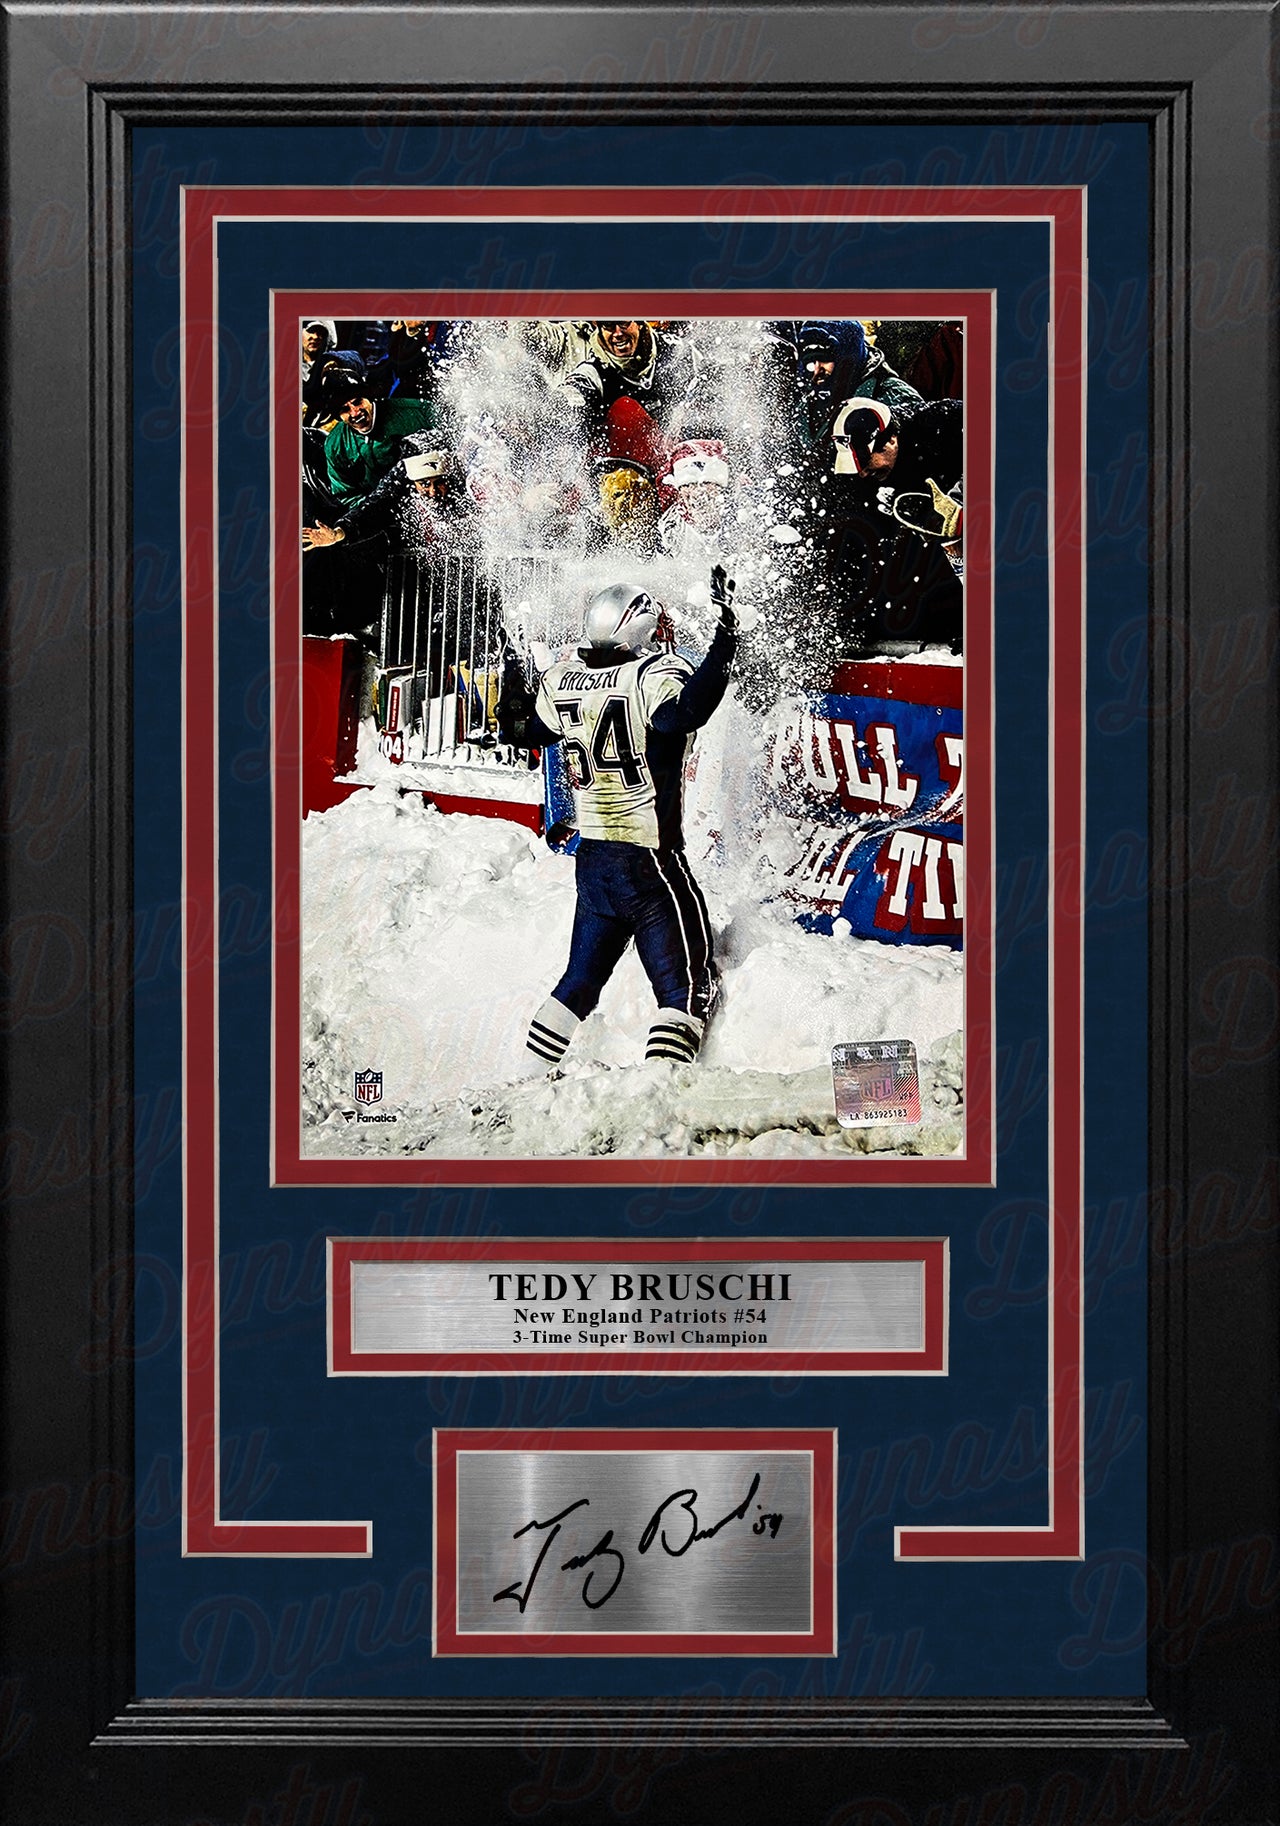 Tedy Bruschi Snow Game New England Patriots 8" x 10" Framed Football Photo with Engraved Autograph - Dynasty Sports & Framing 